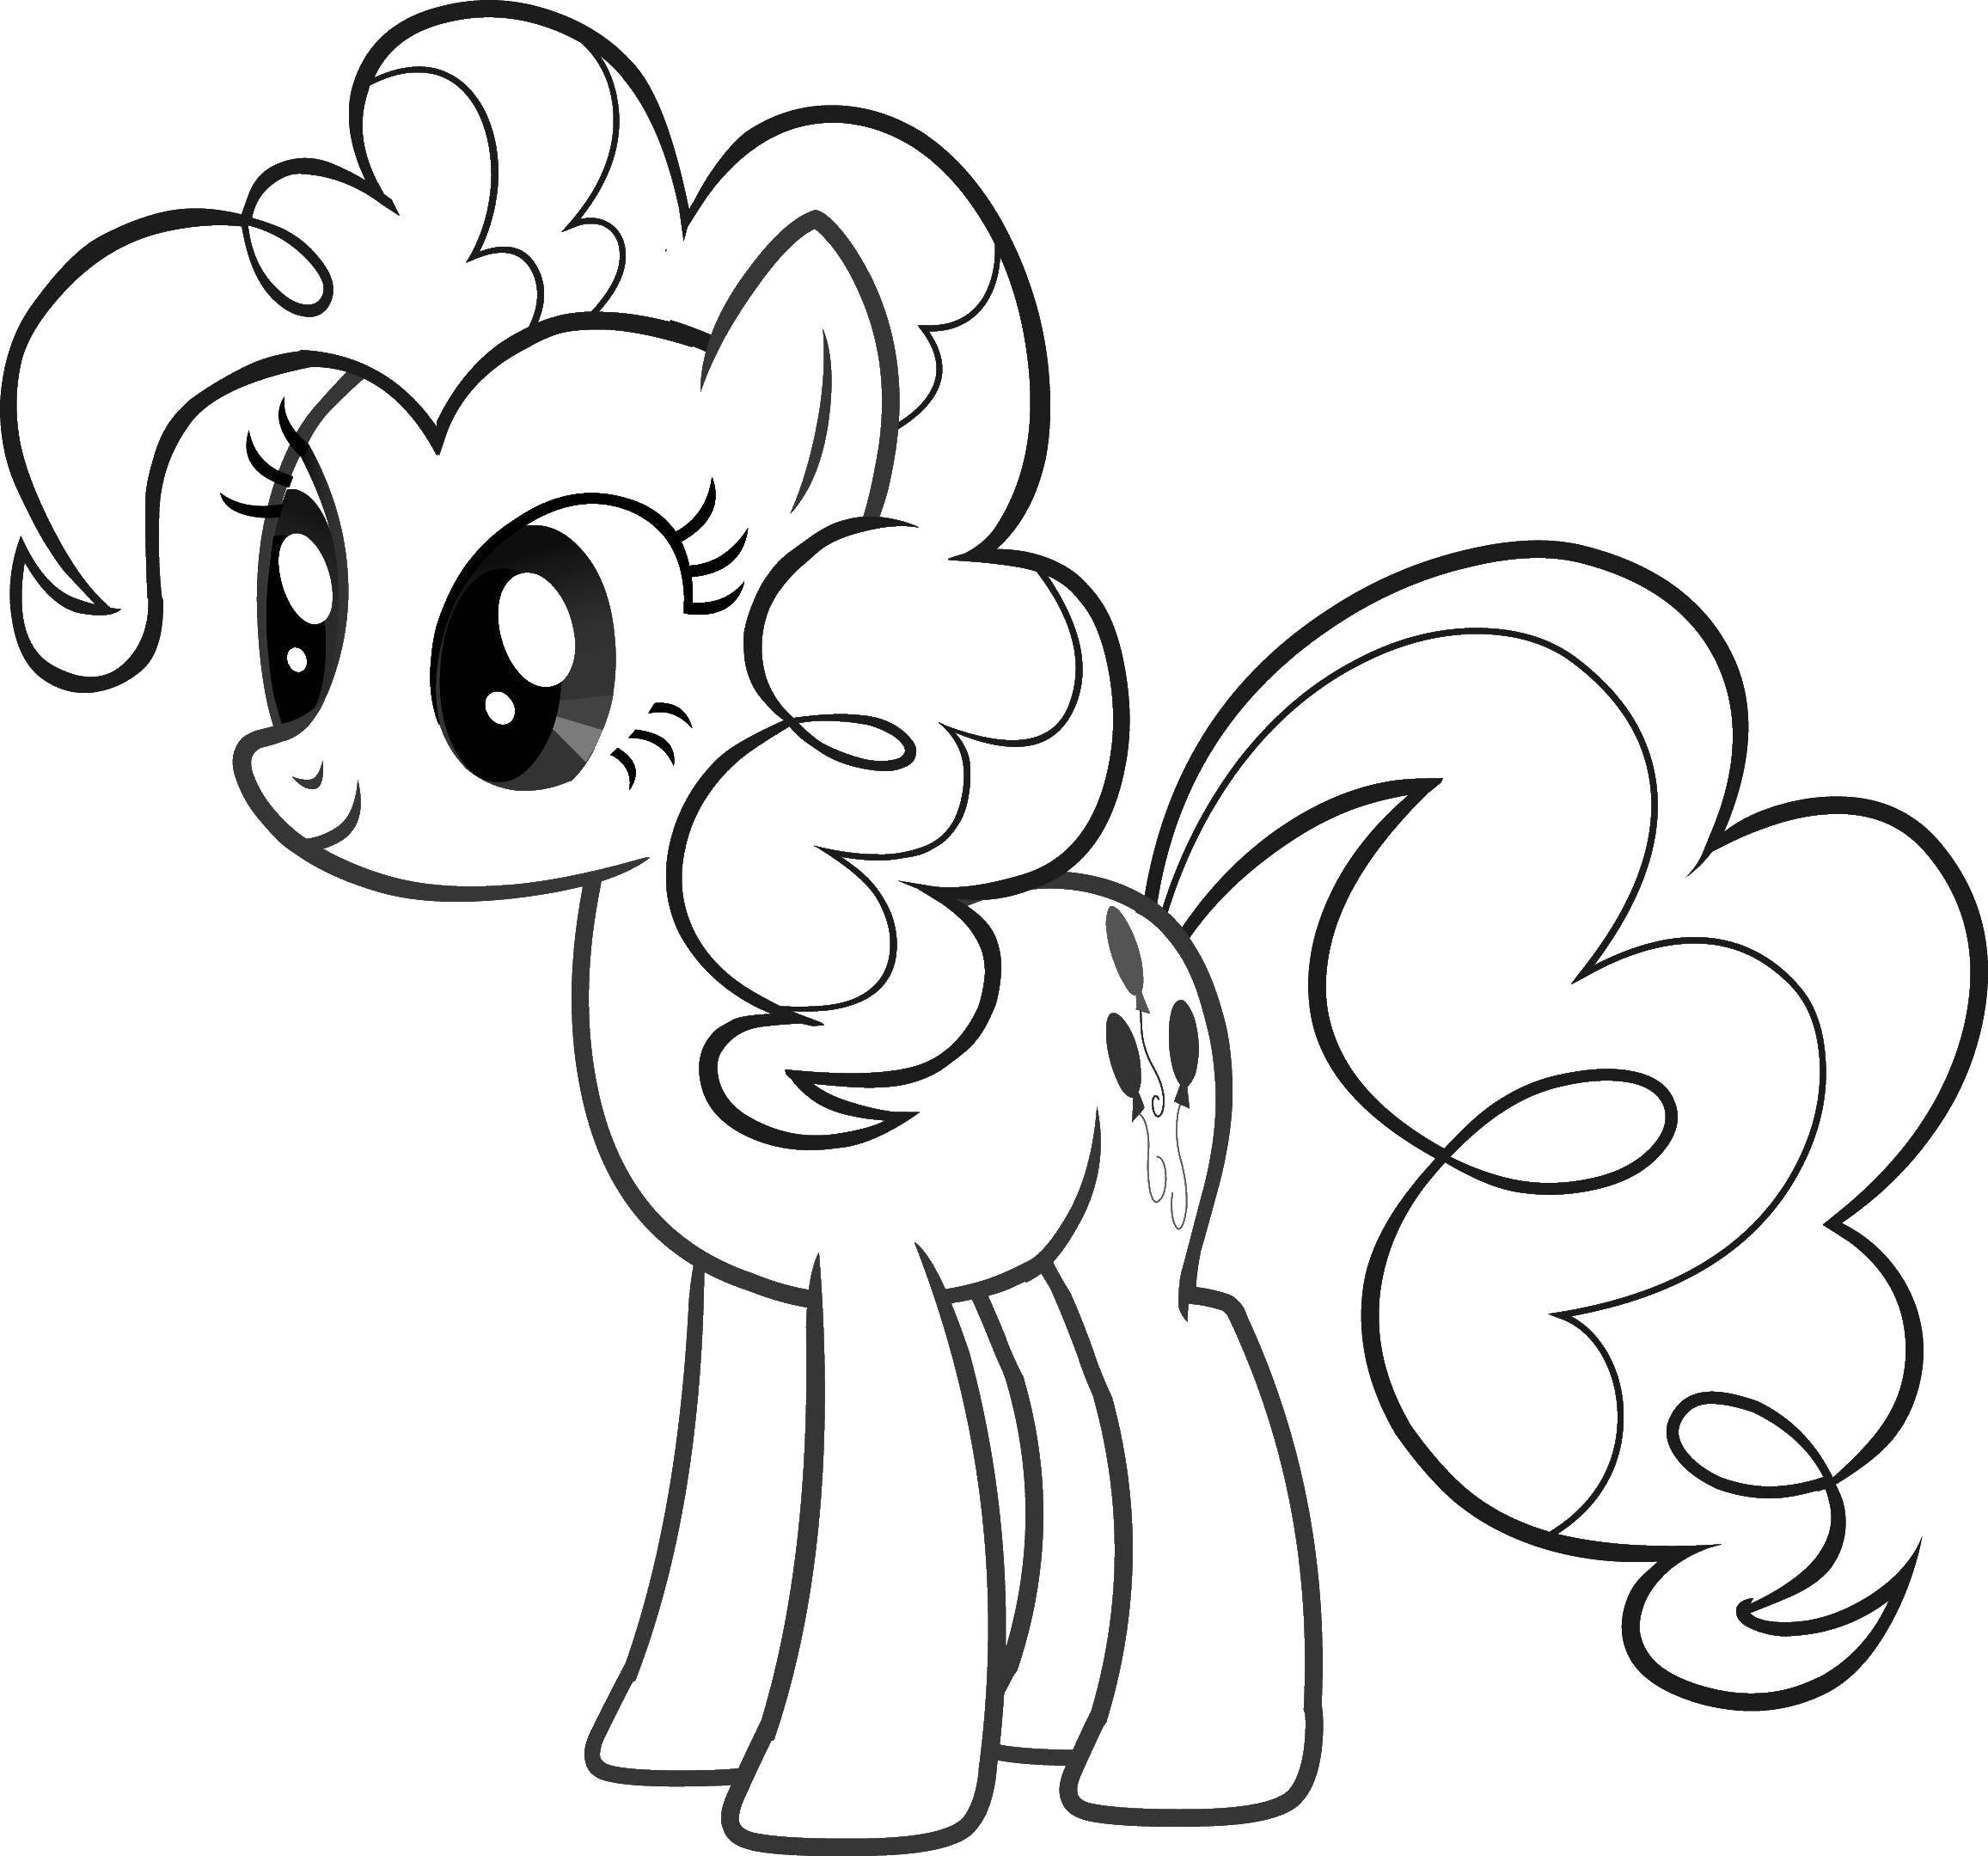 Coloring A pony with beautiful mane and tail. Category Ponies. Tags:  ponies, horses, fairy tales.